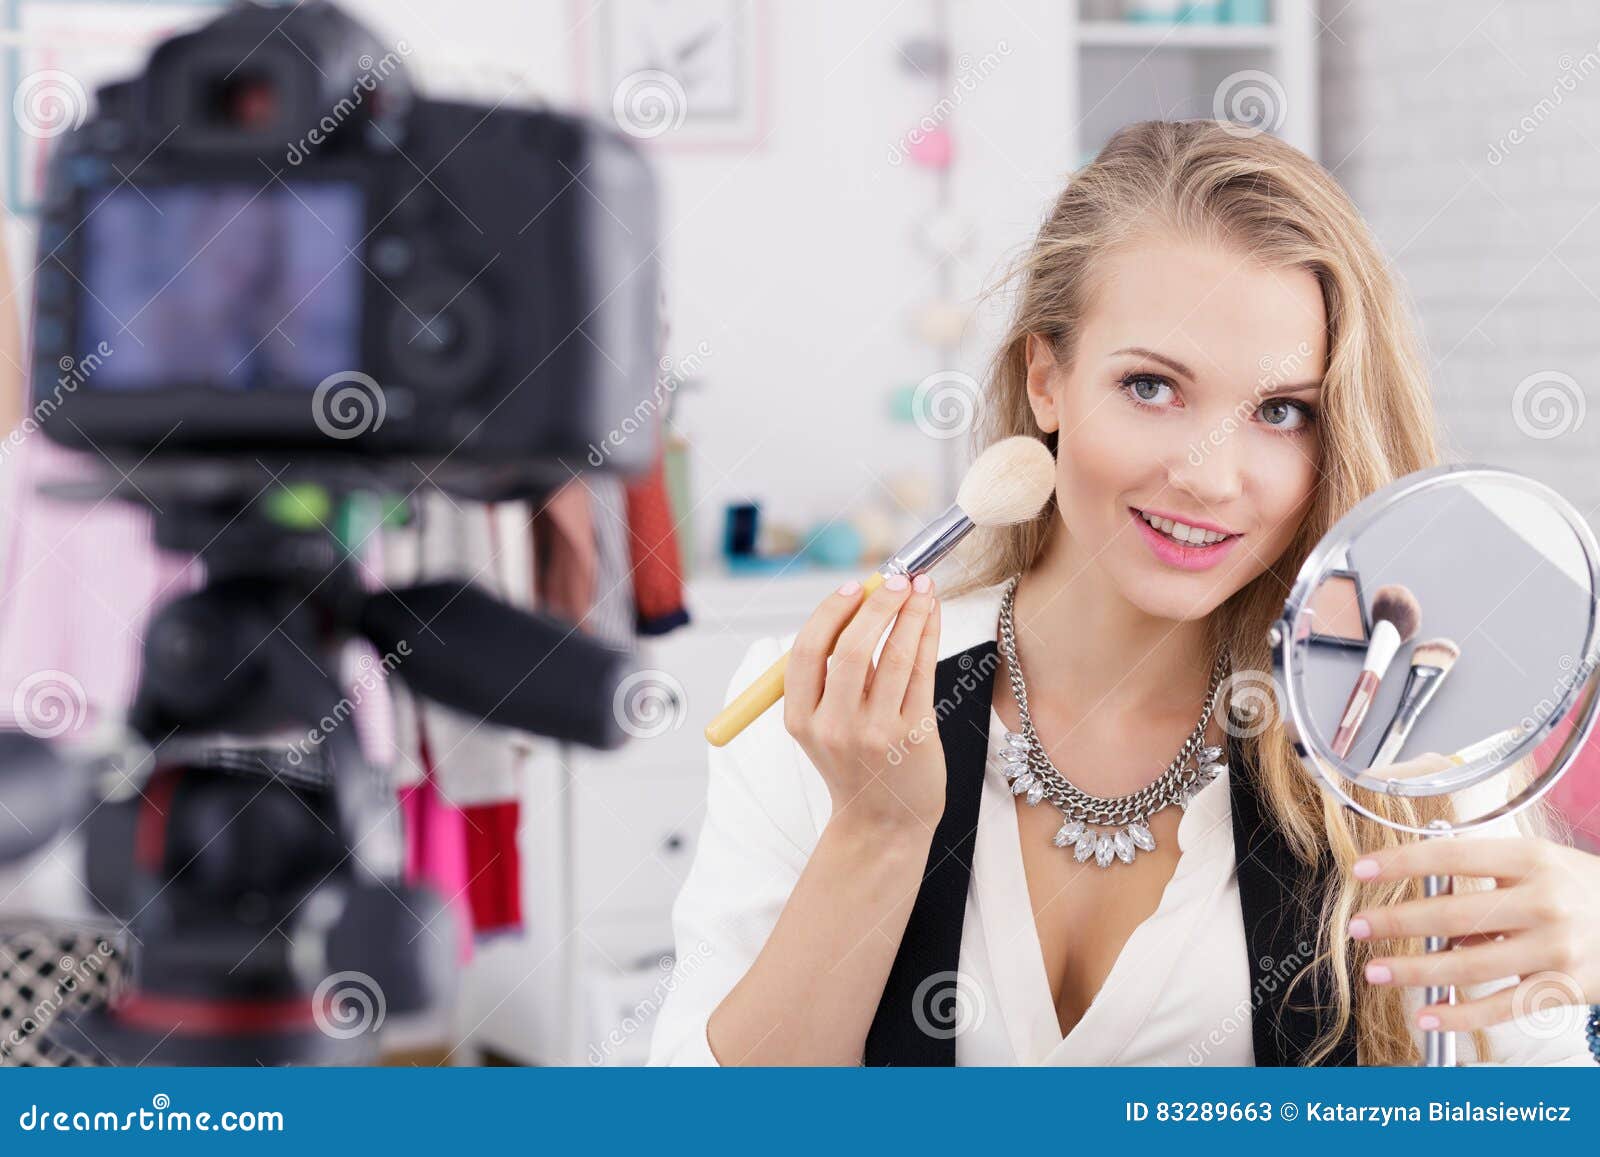 make up vlogger with mirror